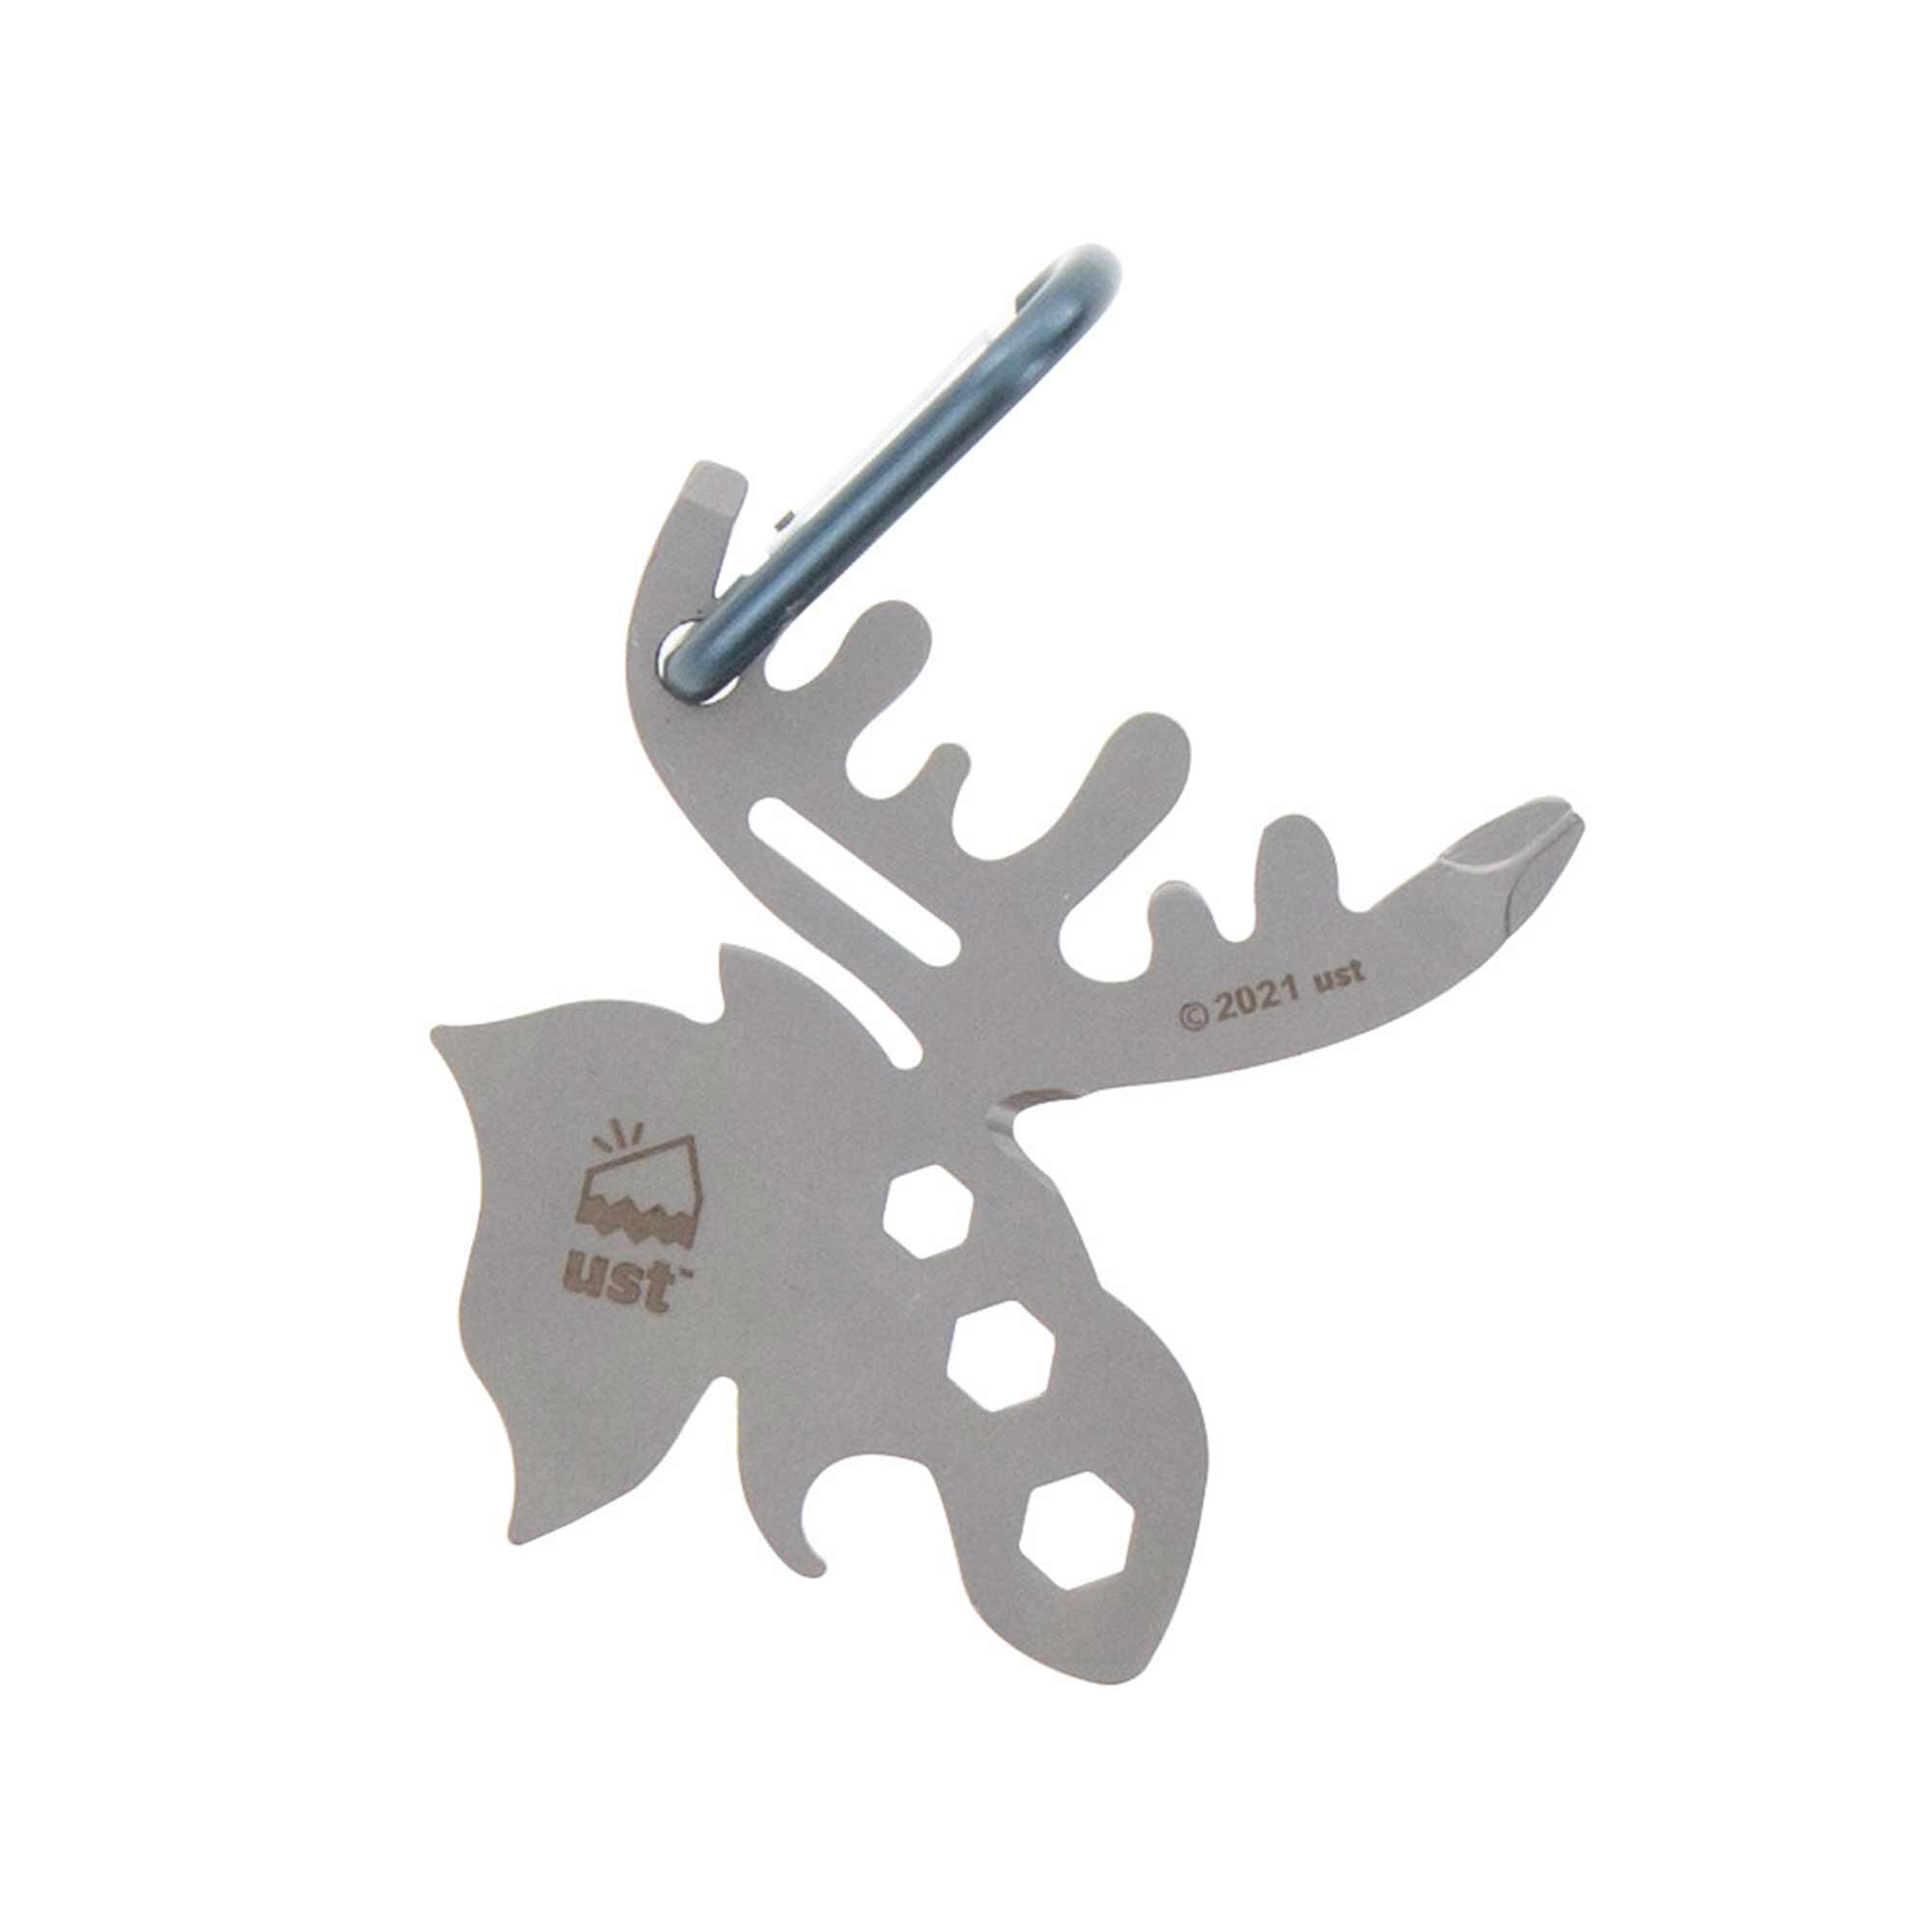 Details about   UST Tool a Long Buffalo Durable Stainless Steel Easily Accessible Multi-Tool 